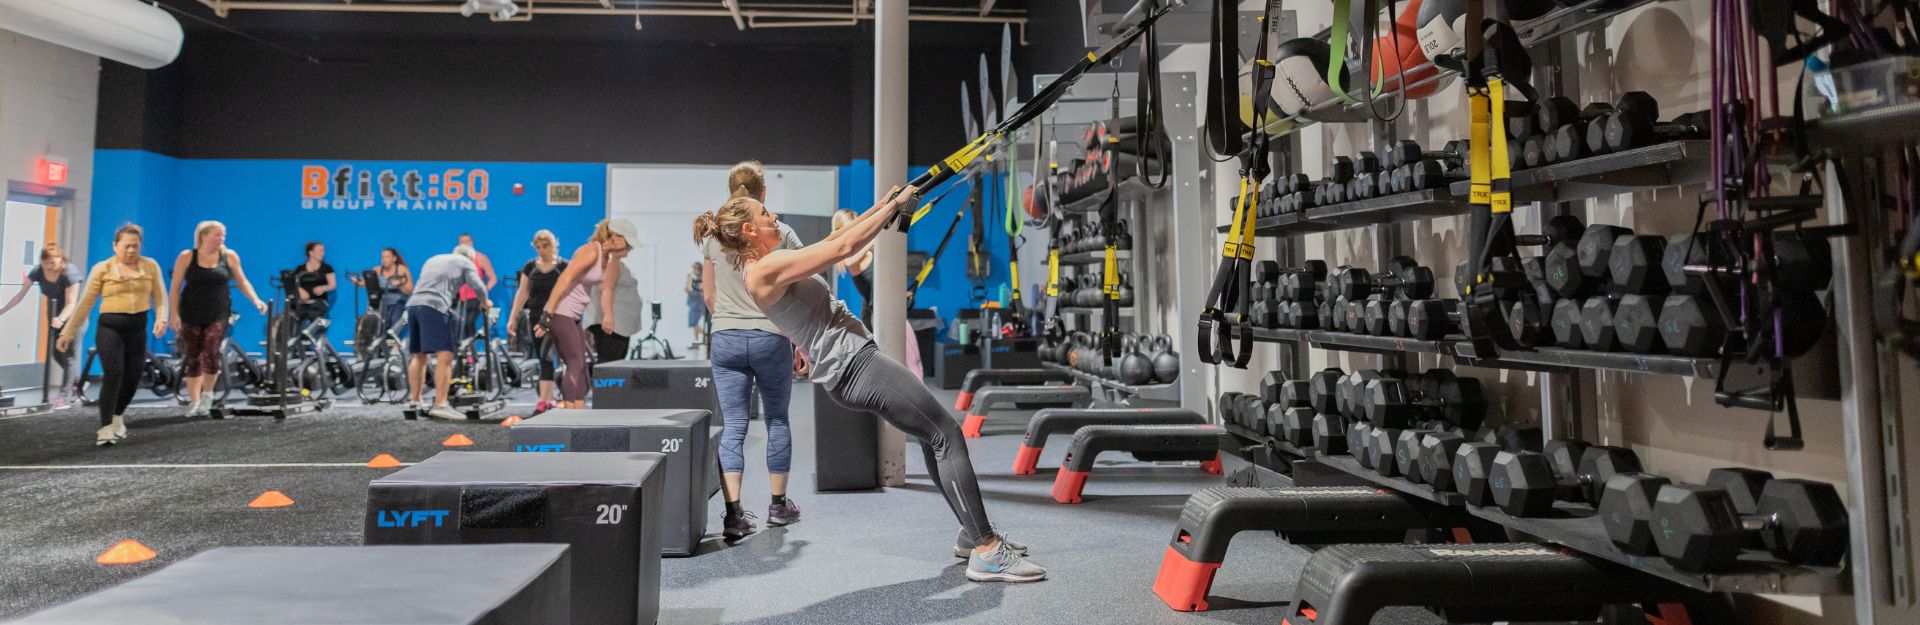 a woman working out in a workout studio